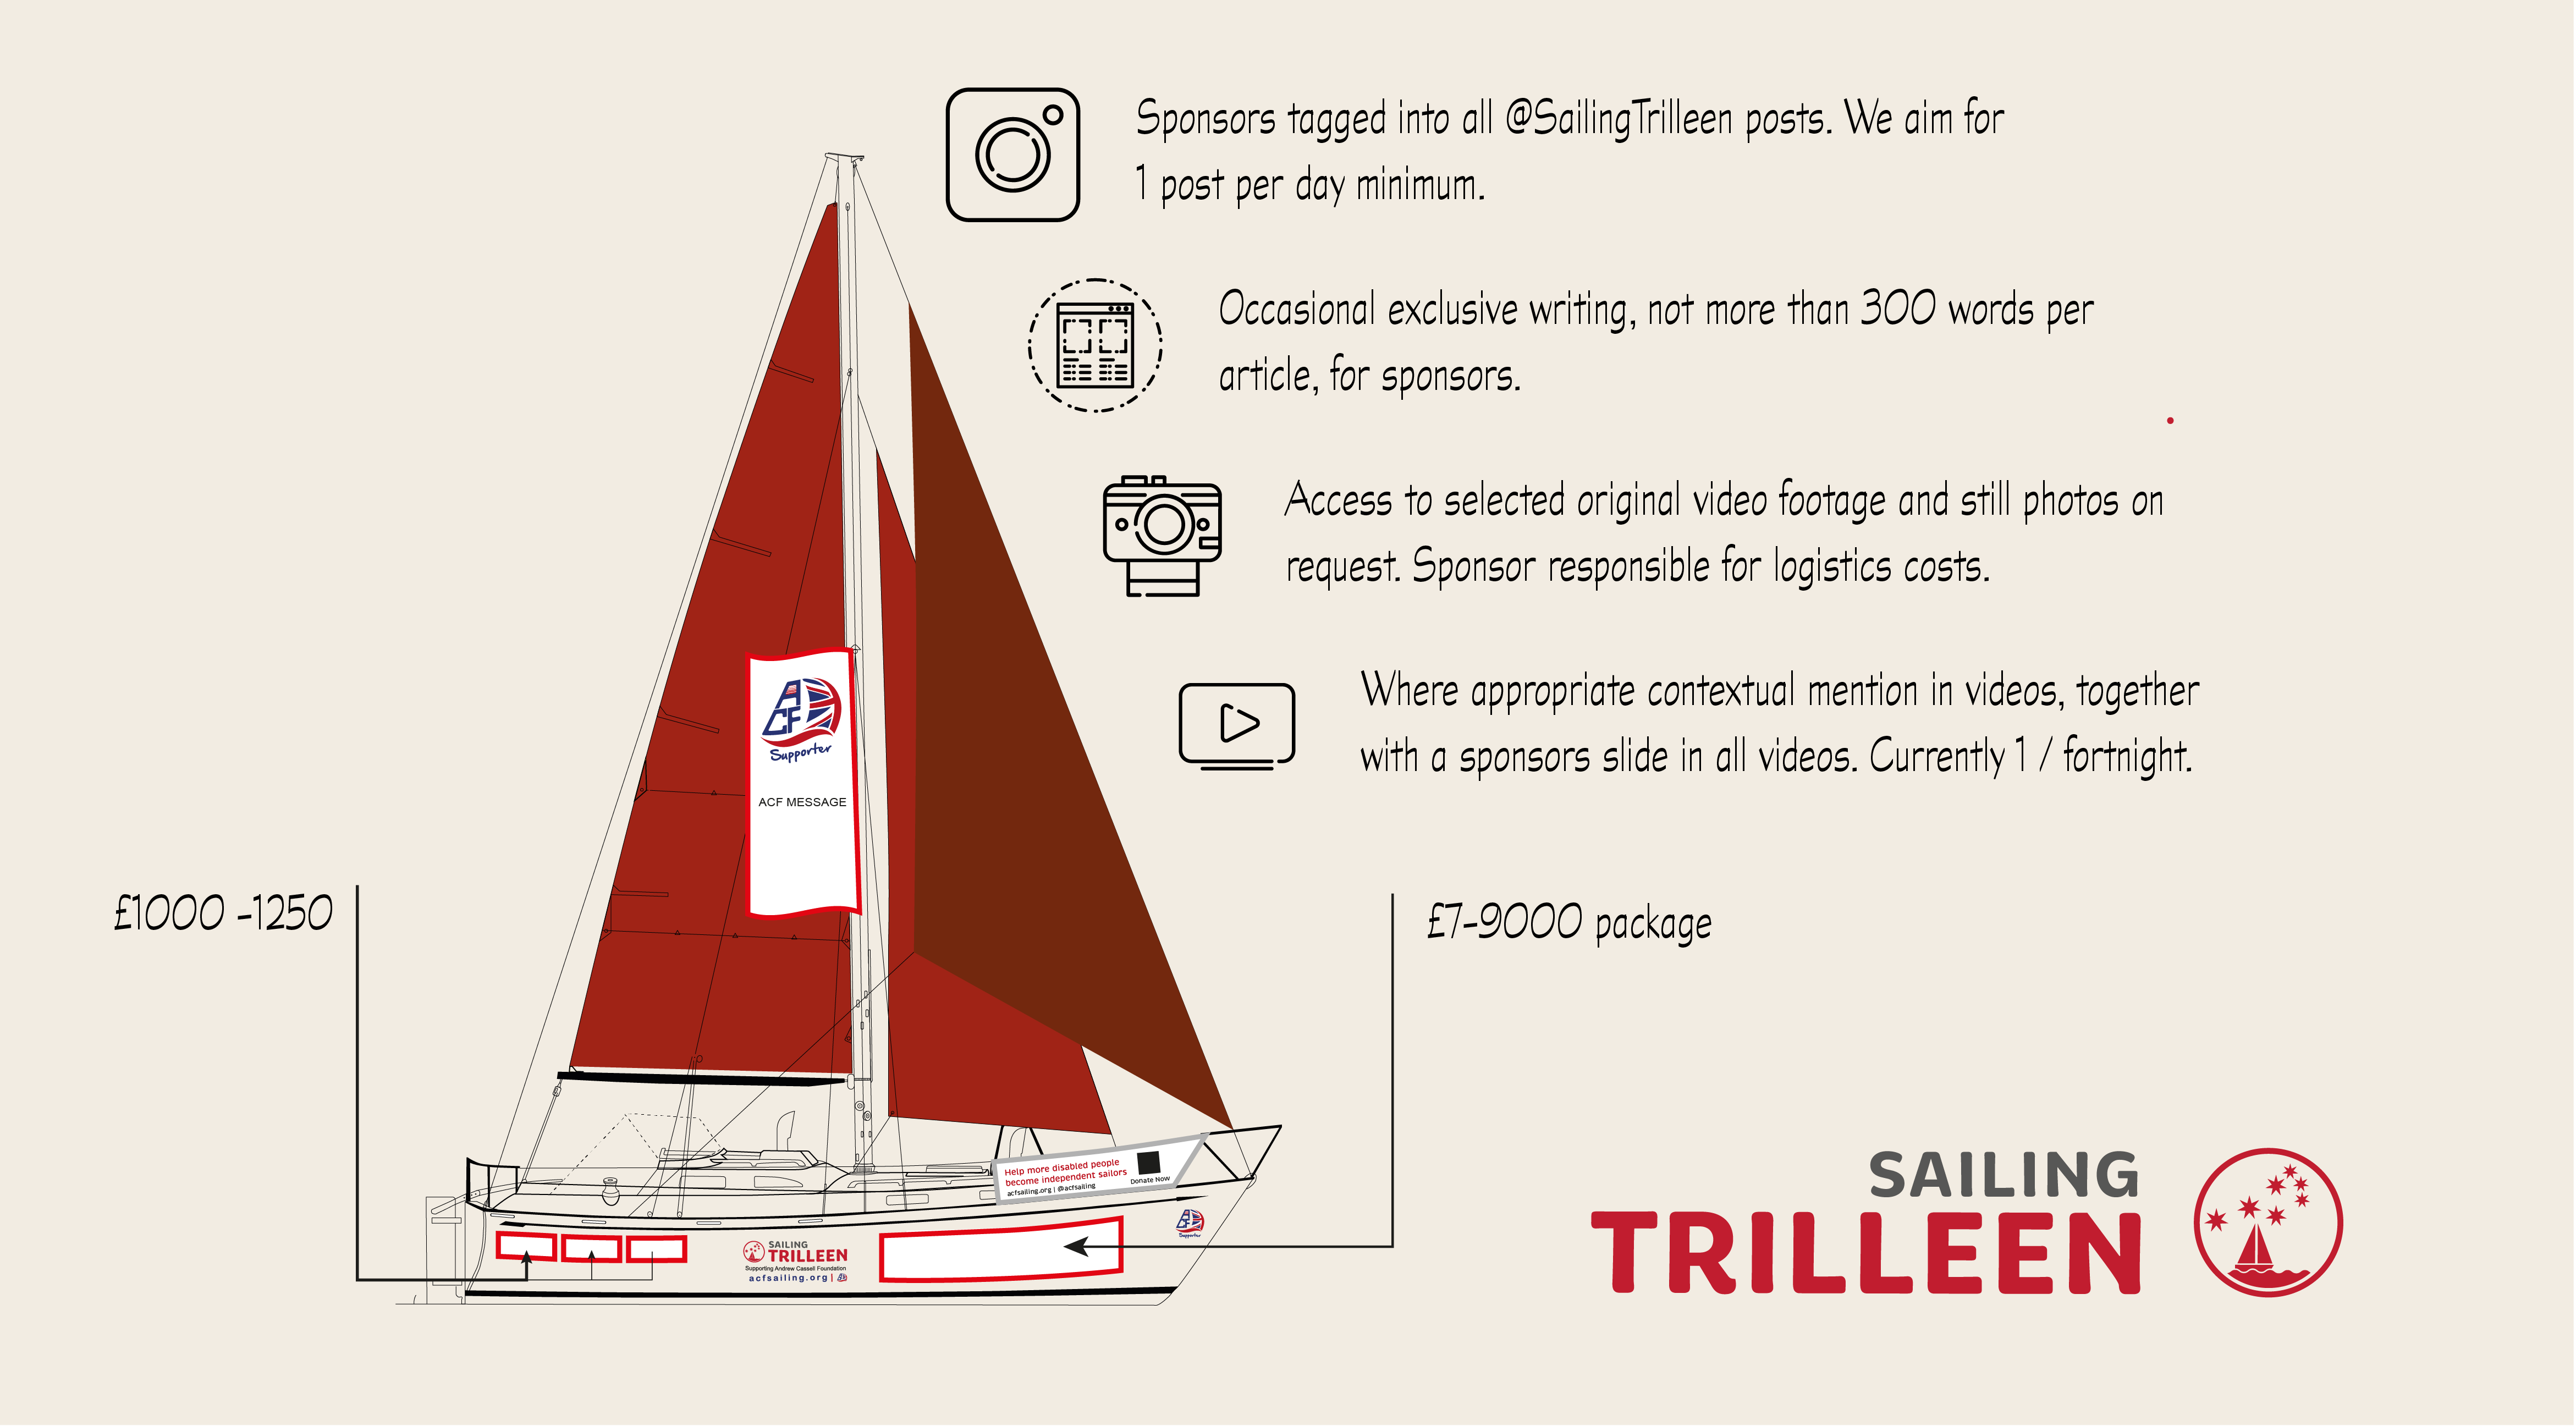 Image showing Trilleen and sponsorship opportunities